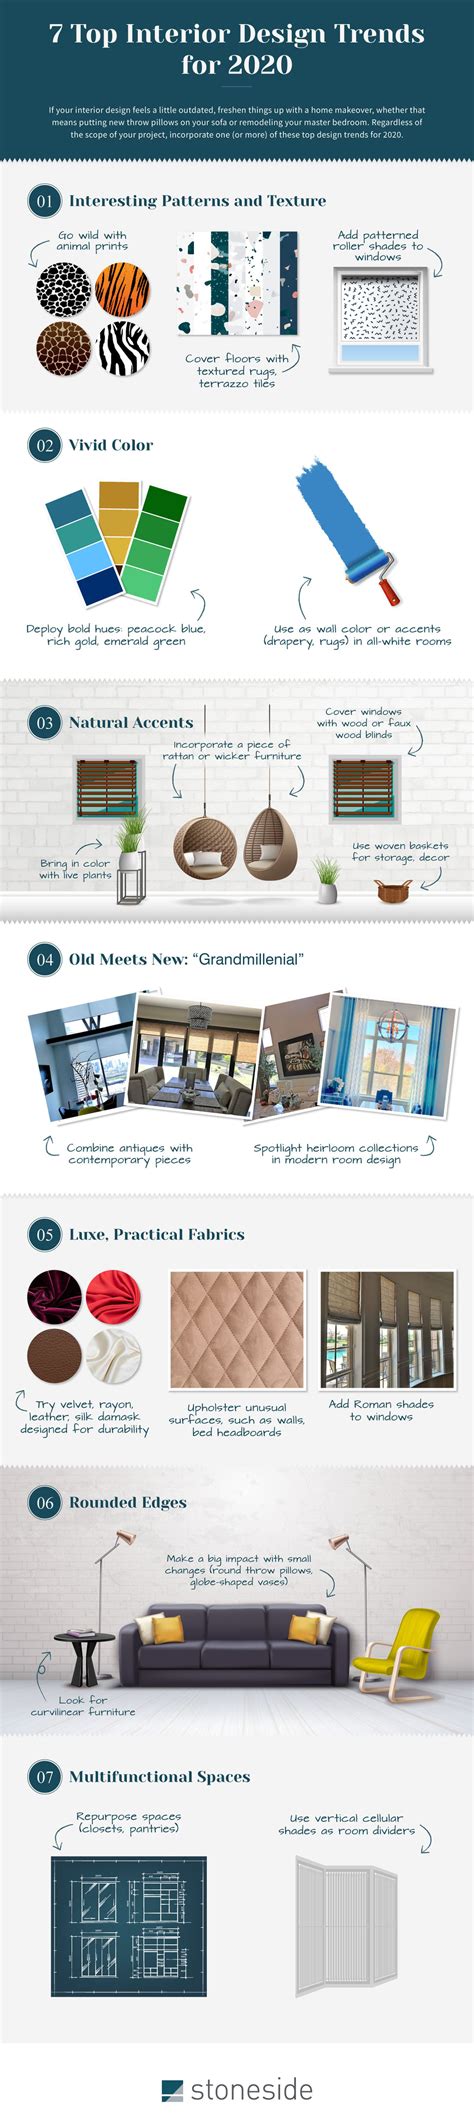 7 Top Interior Design Trends For 2020 Infographic